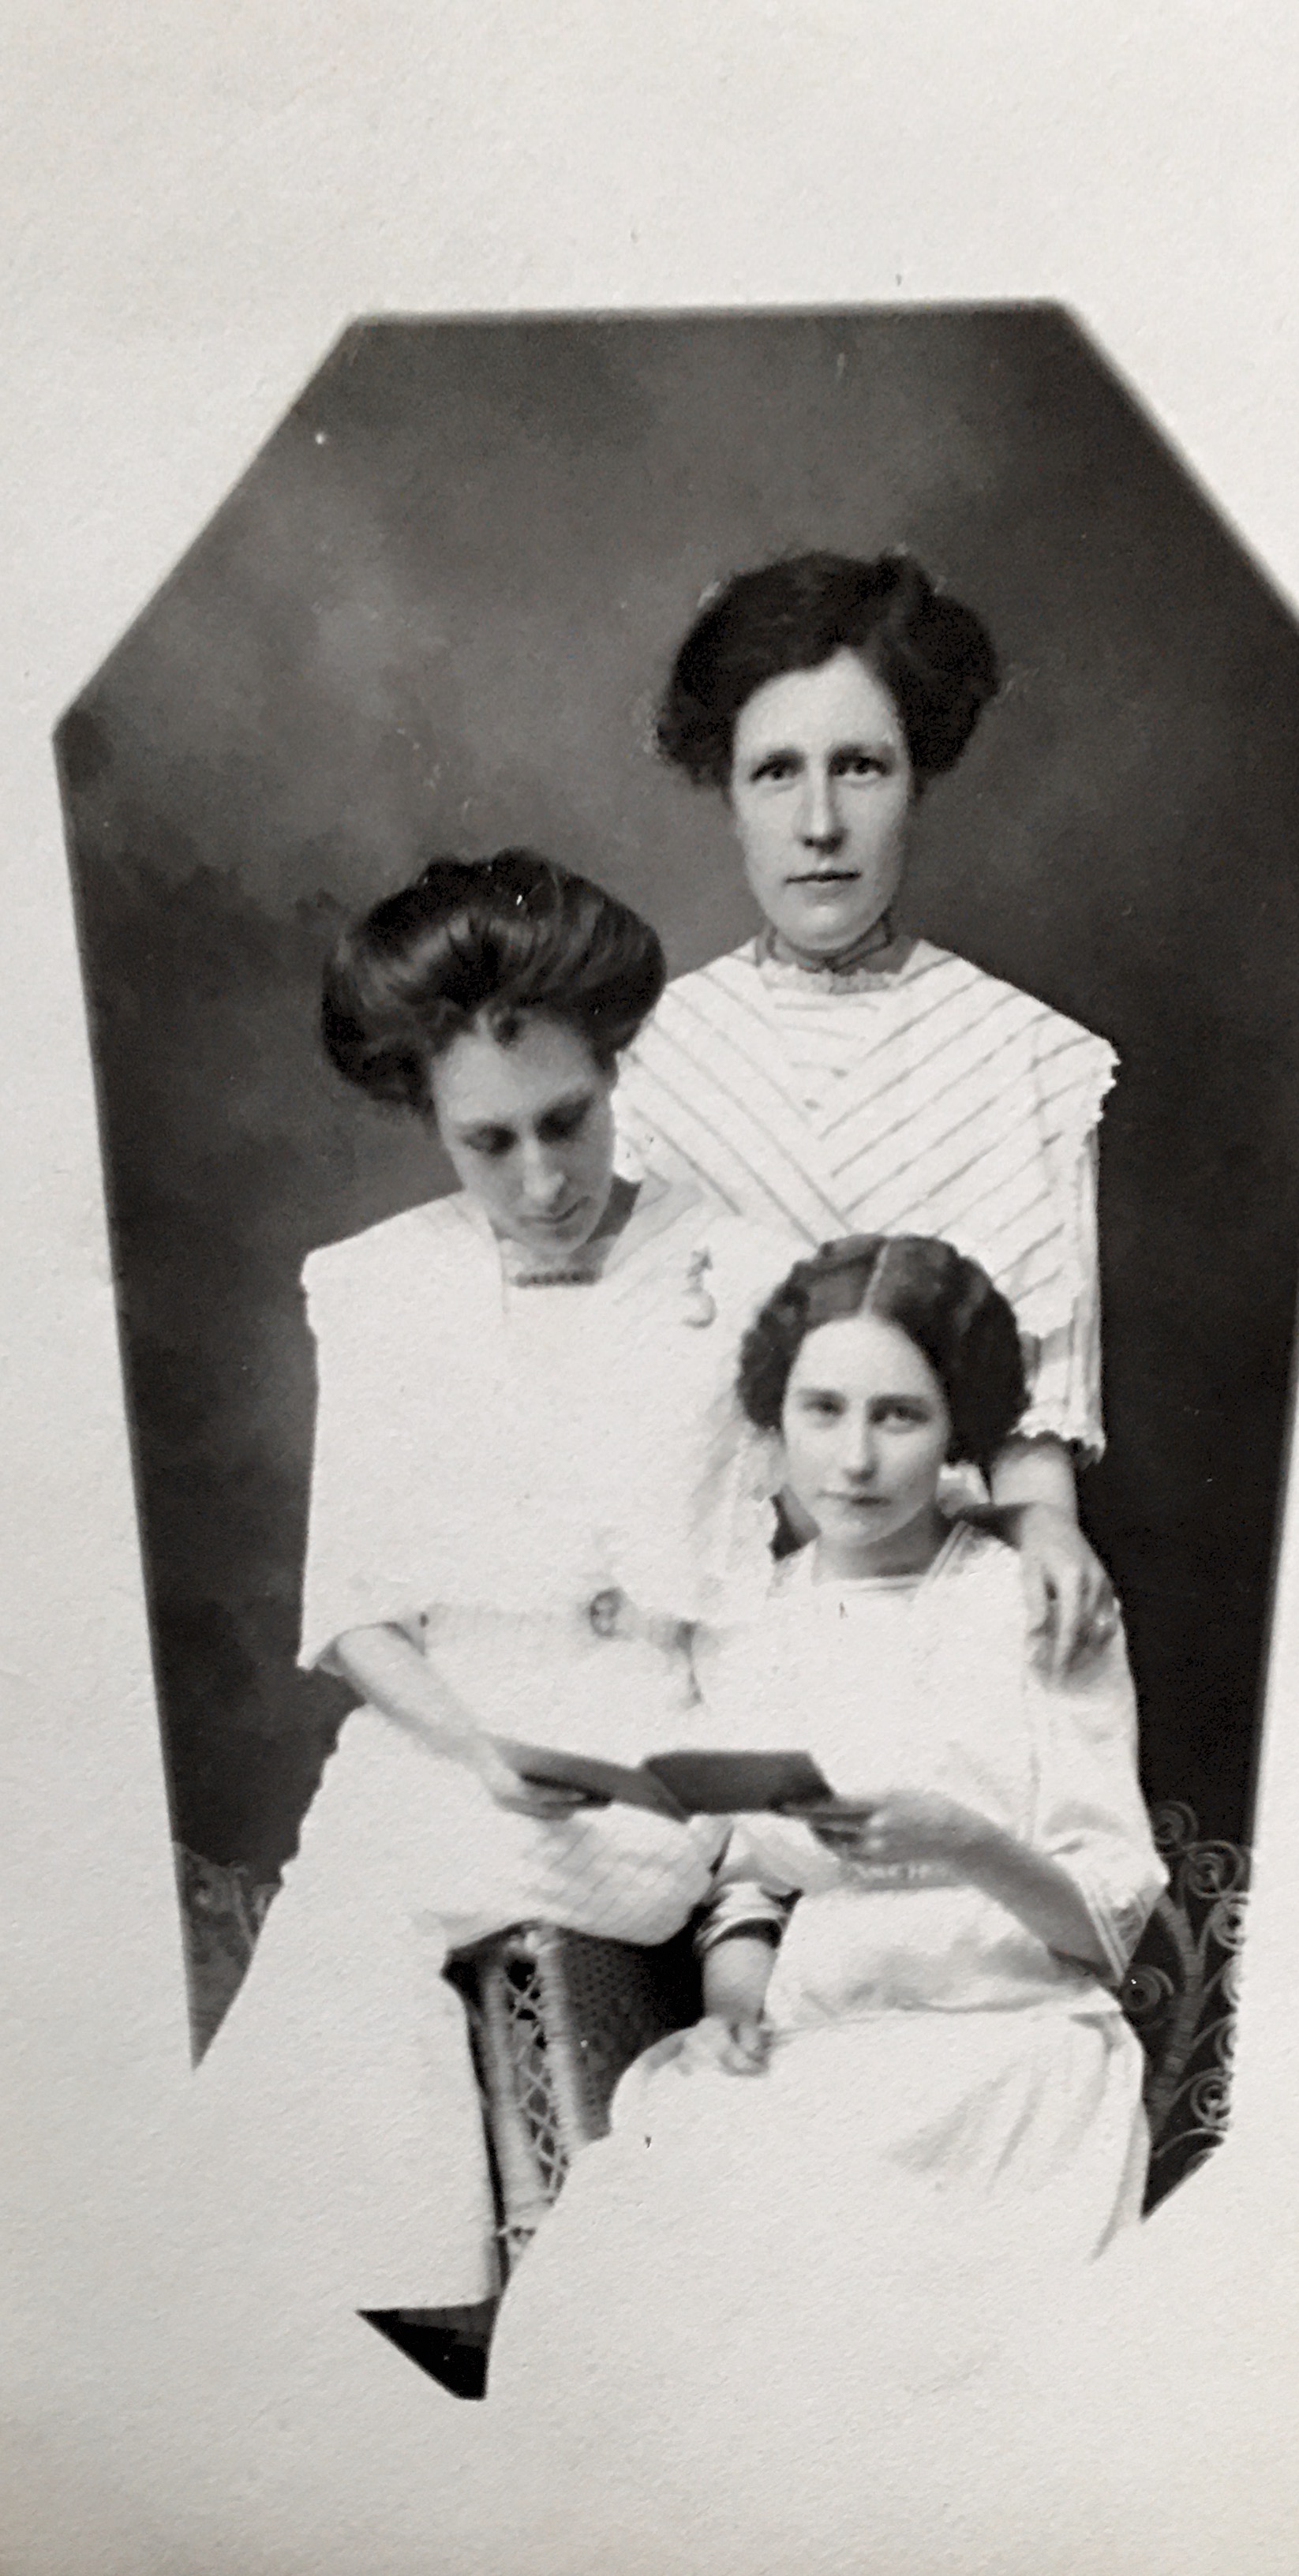 Three of my great aunts taken about 1914